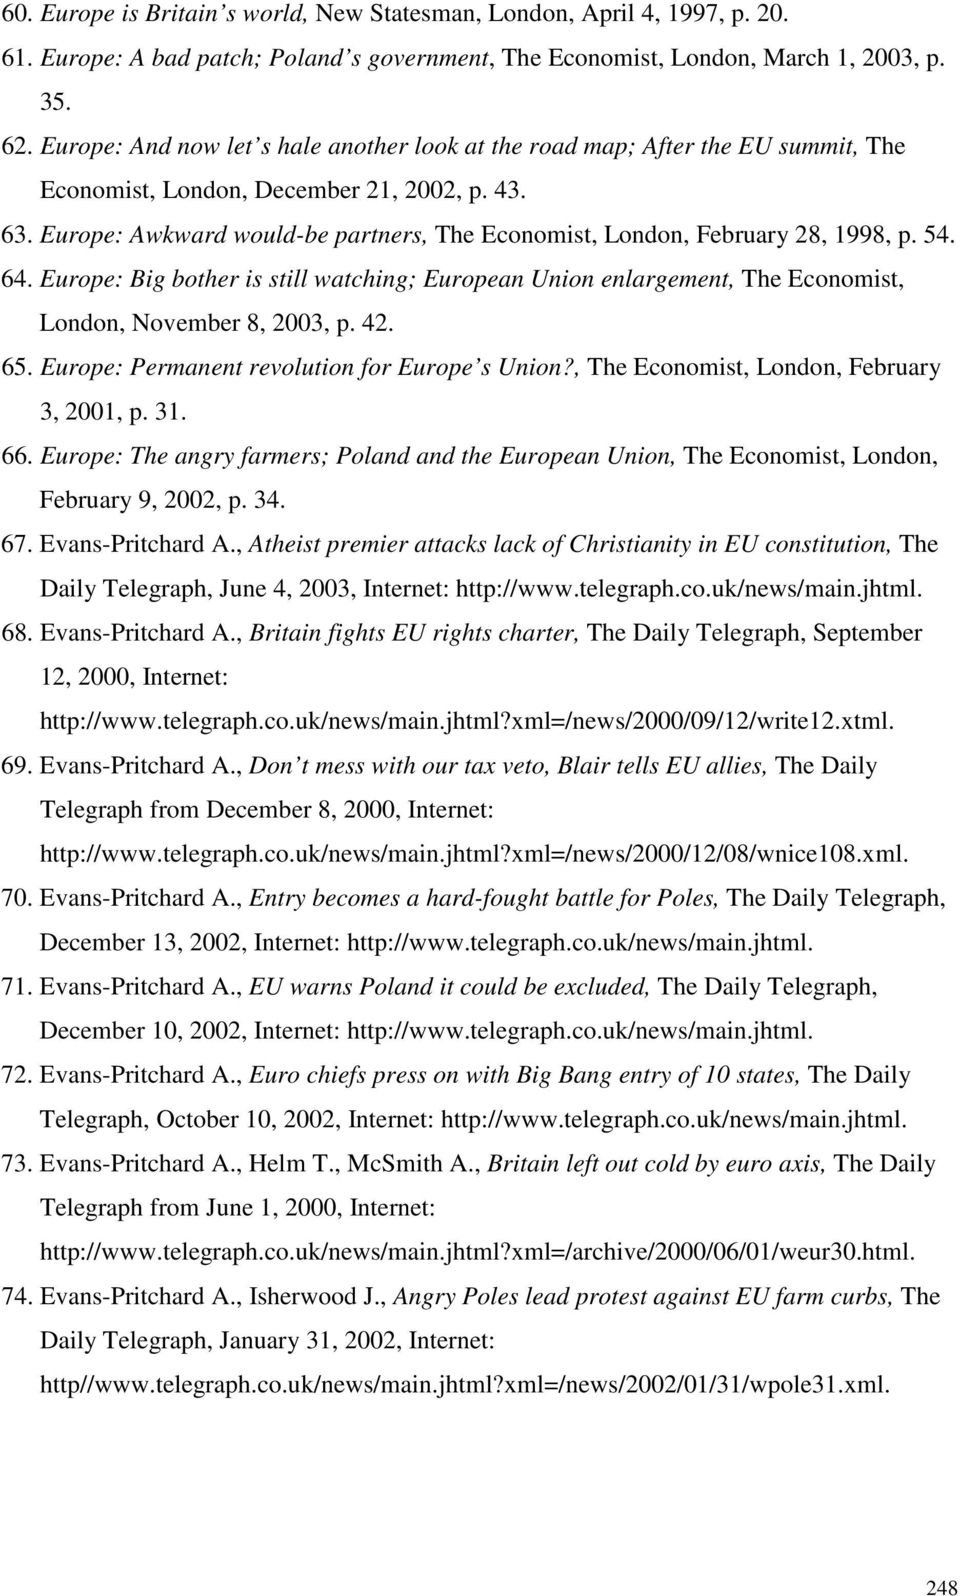 Europe: Awkward would-be partners, The Economist, London, February 28, 1998, p. 54. 64. Europe: Big bother is still watching; European Union enlargement, The Economist, London, November 8, 2003, p.